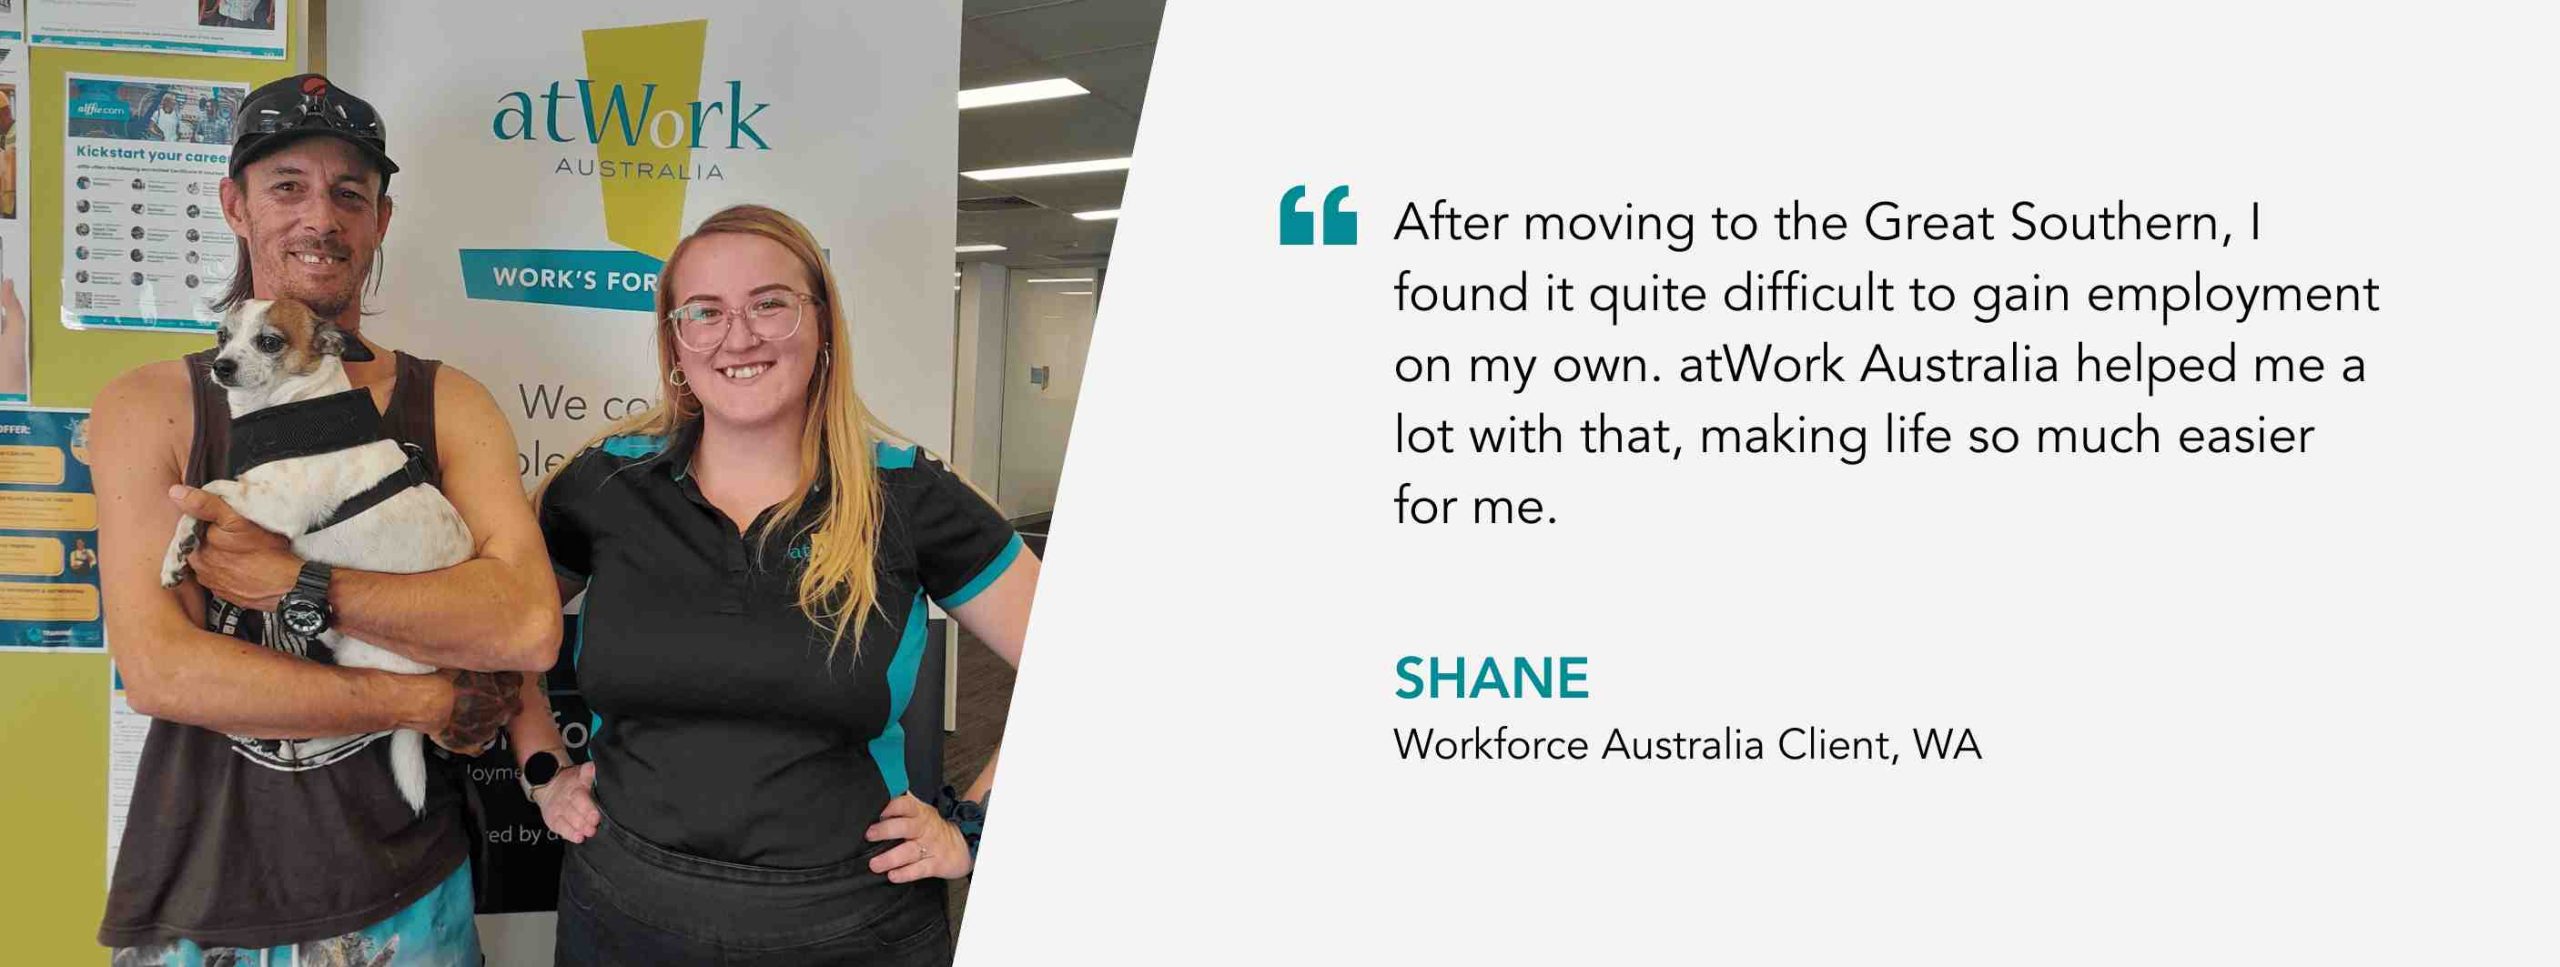 After moving to the Great Southern, I found it quite difficult to gain employment on my own. atWork Australia helped me a lot with that, making life so much easier for me. Shane, Workforce Australia Client, WA.